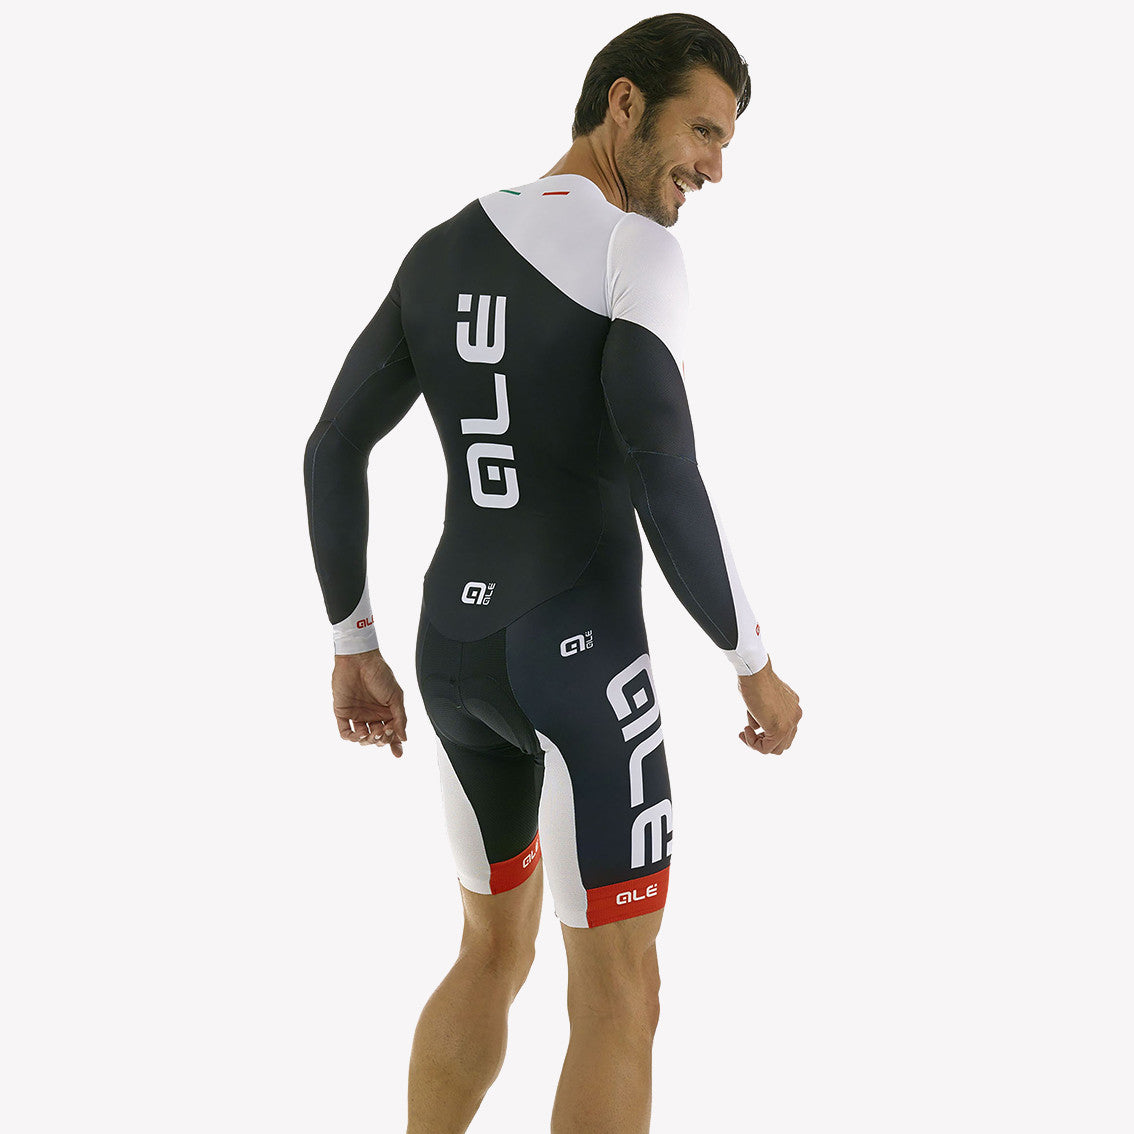 cycling speed suit men's